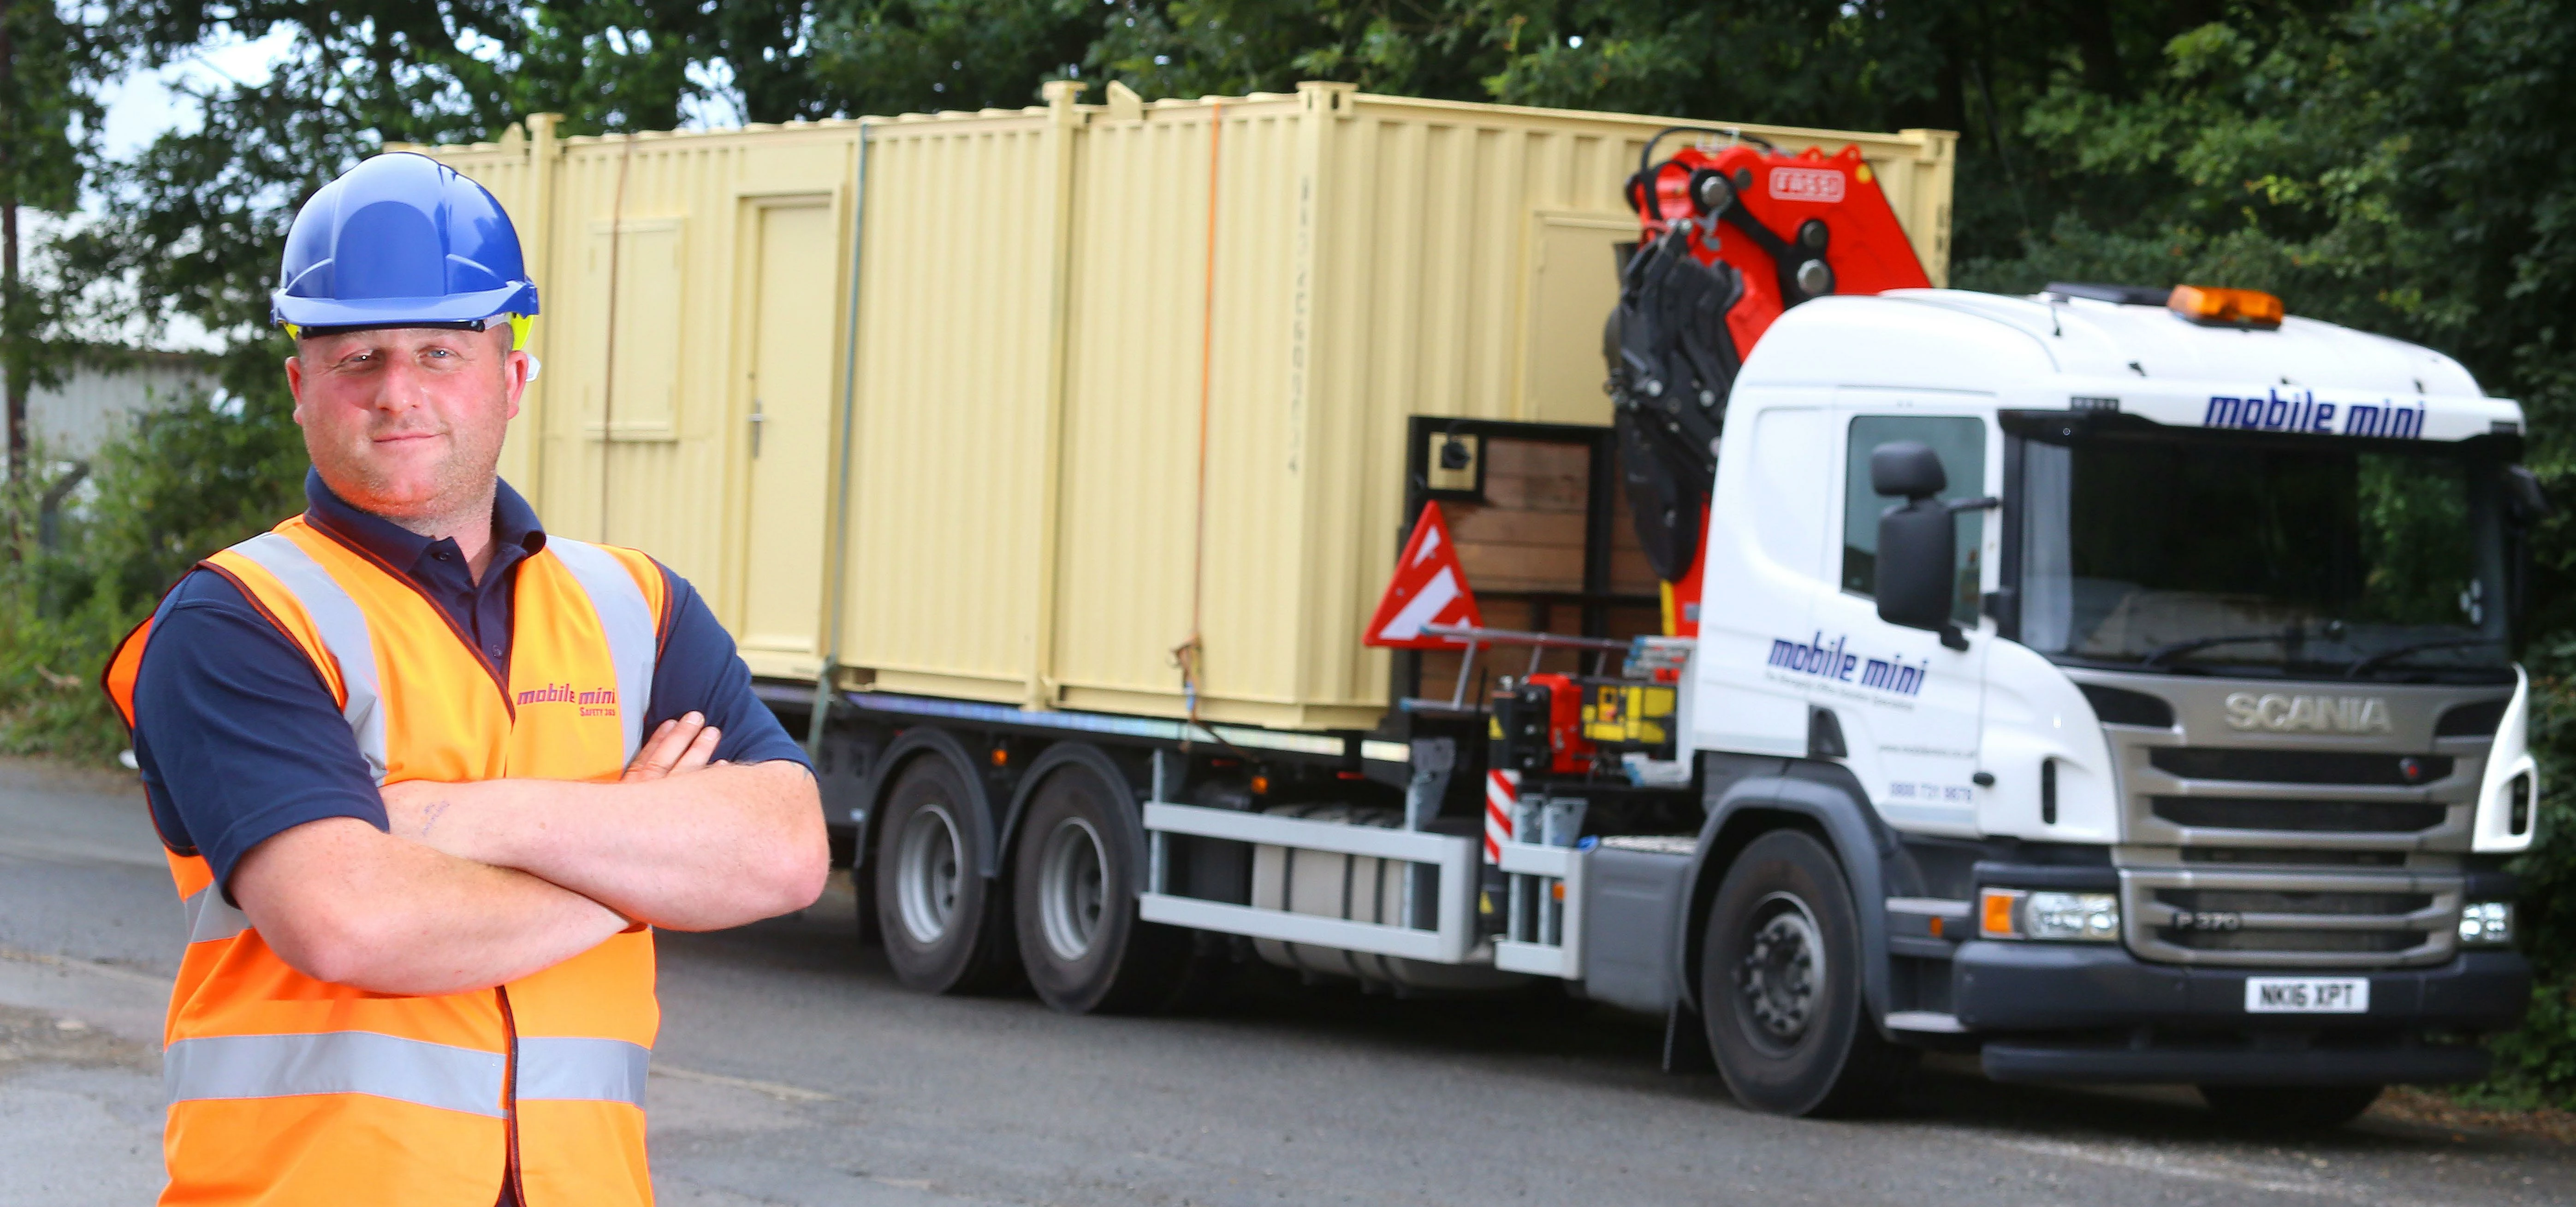 Simon Wood, one of the first employees to complete Mobile Mini's new, fully-funded HGV Driver Develo